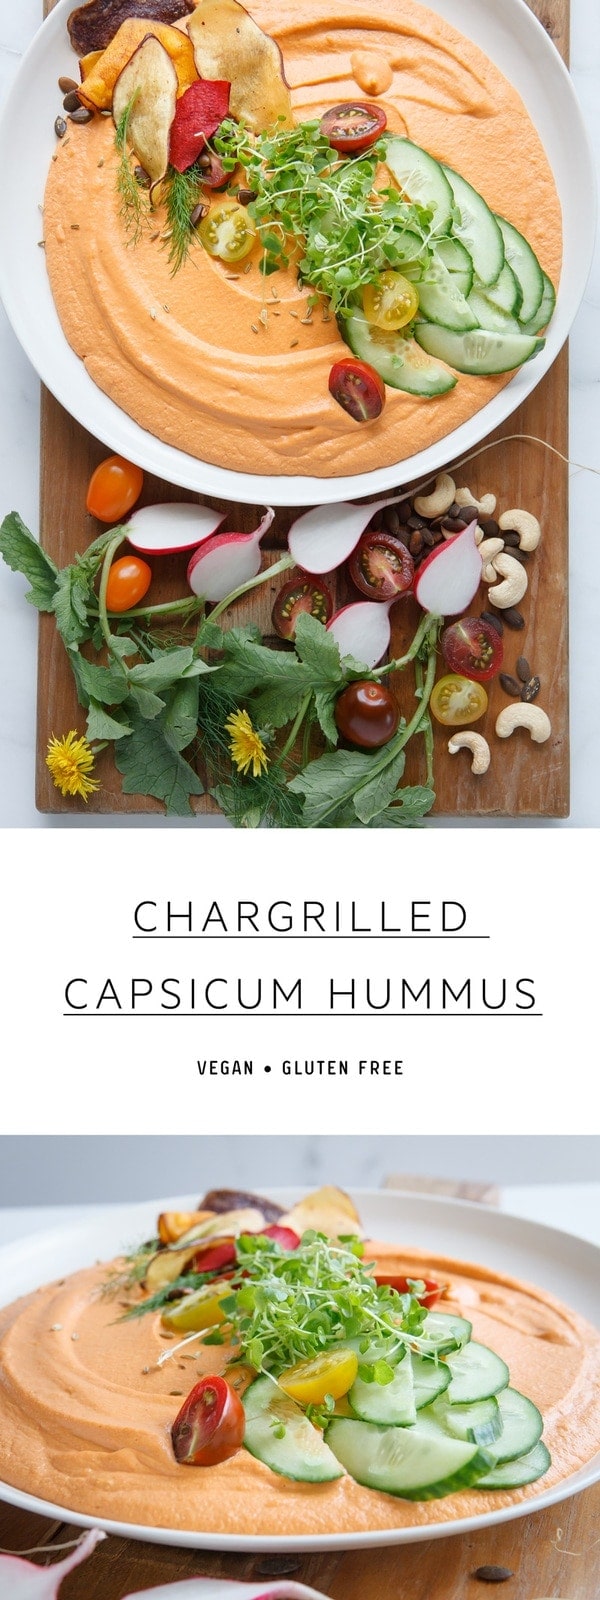 Chargrilled Capsicum Hummus with cashews and miso. #chargrilledhummus #capsicumhummus #redpepperhummus #redpepperhummusrecipe #roastedredpepperhummus #redpepperhummusroasted #redpepperhummusrecipe #AscensionKitchen // Pin to your own inspiration board! //